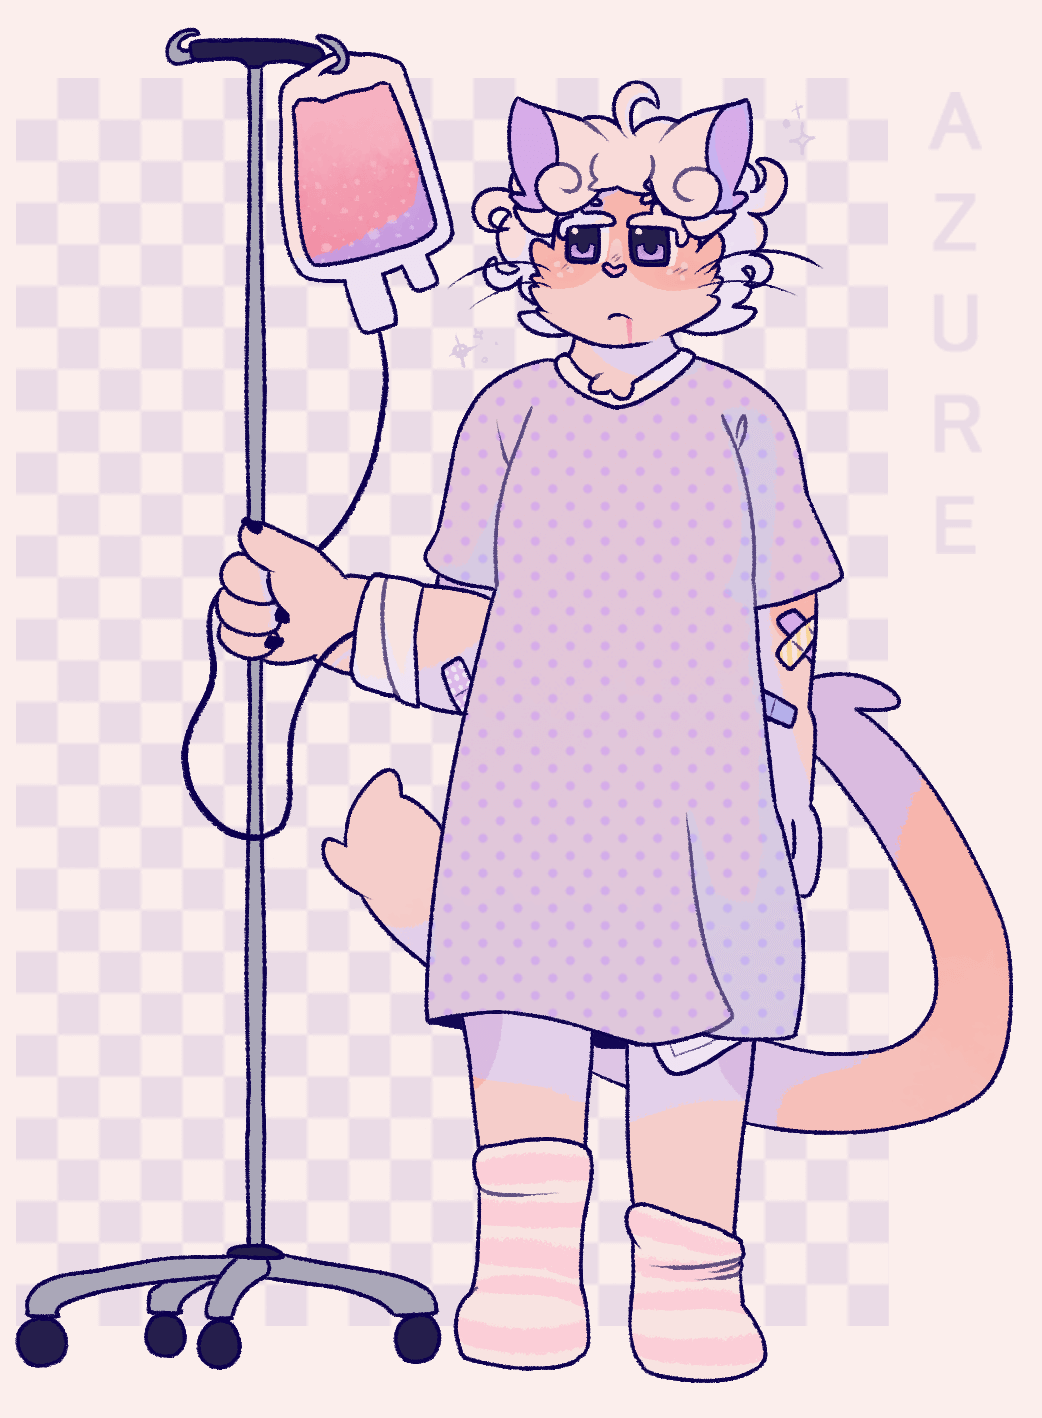 Art of Bede from Pokemon as an anthro cat, in pastel colors. He's in a polka dotted hospital gown, and holding a standing IV poll with pink liquid inside of it. Blood the same pink color is coming out of his mouth like drool, but he doesn't seem to care. The IV is connected to his arm, underneath a wrapped bandage, and he has cute, patterned bandaids on his arm. He has a patch bandaid on his legs, and striped socks, with one drooping down further than the other.